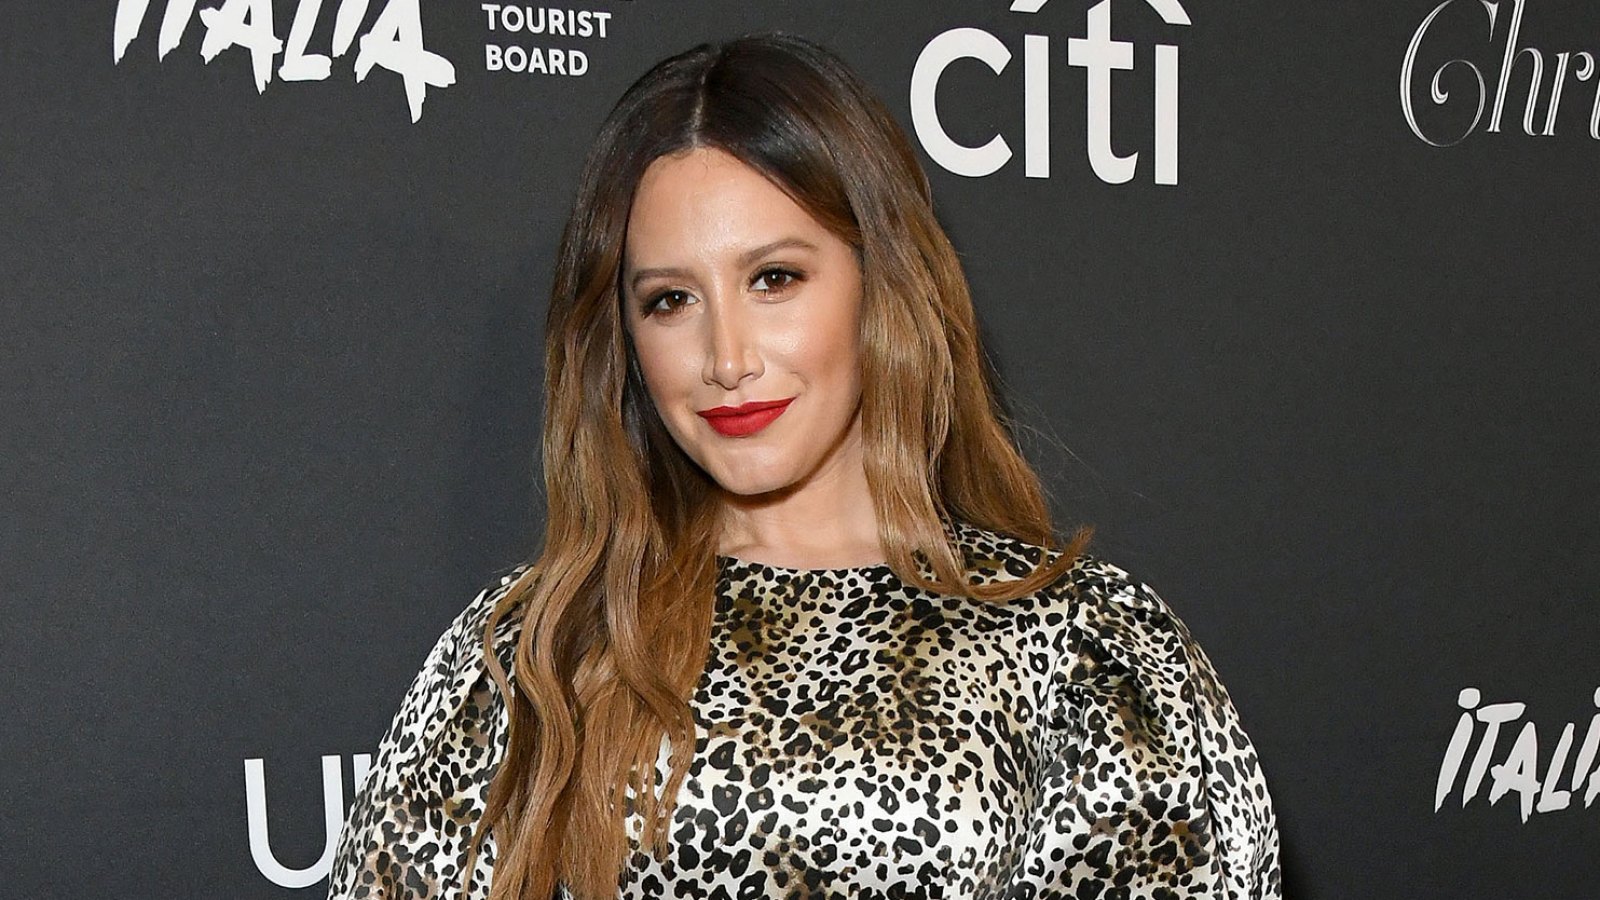 Ashley Tisdale Claims Disney Made Her Change Song Lyrics During High School Musical Concerts